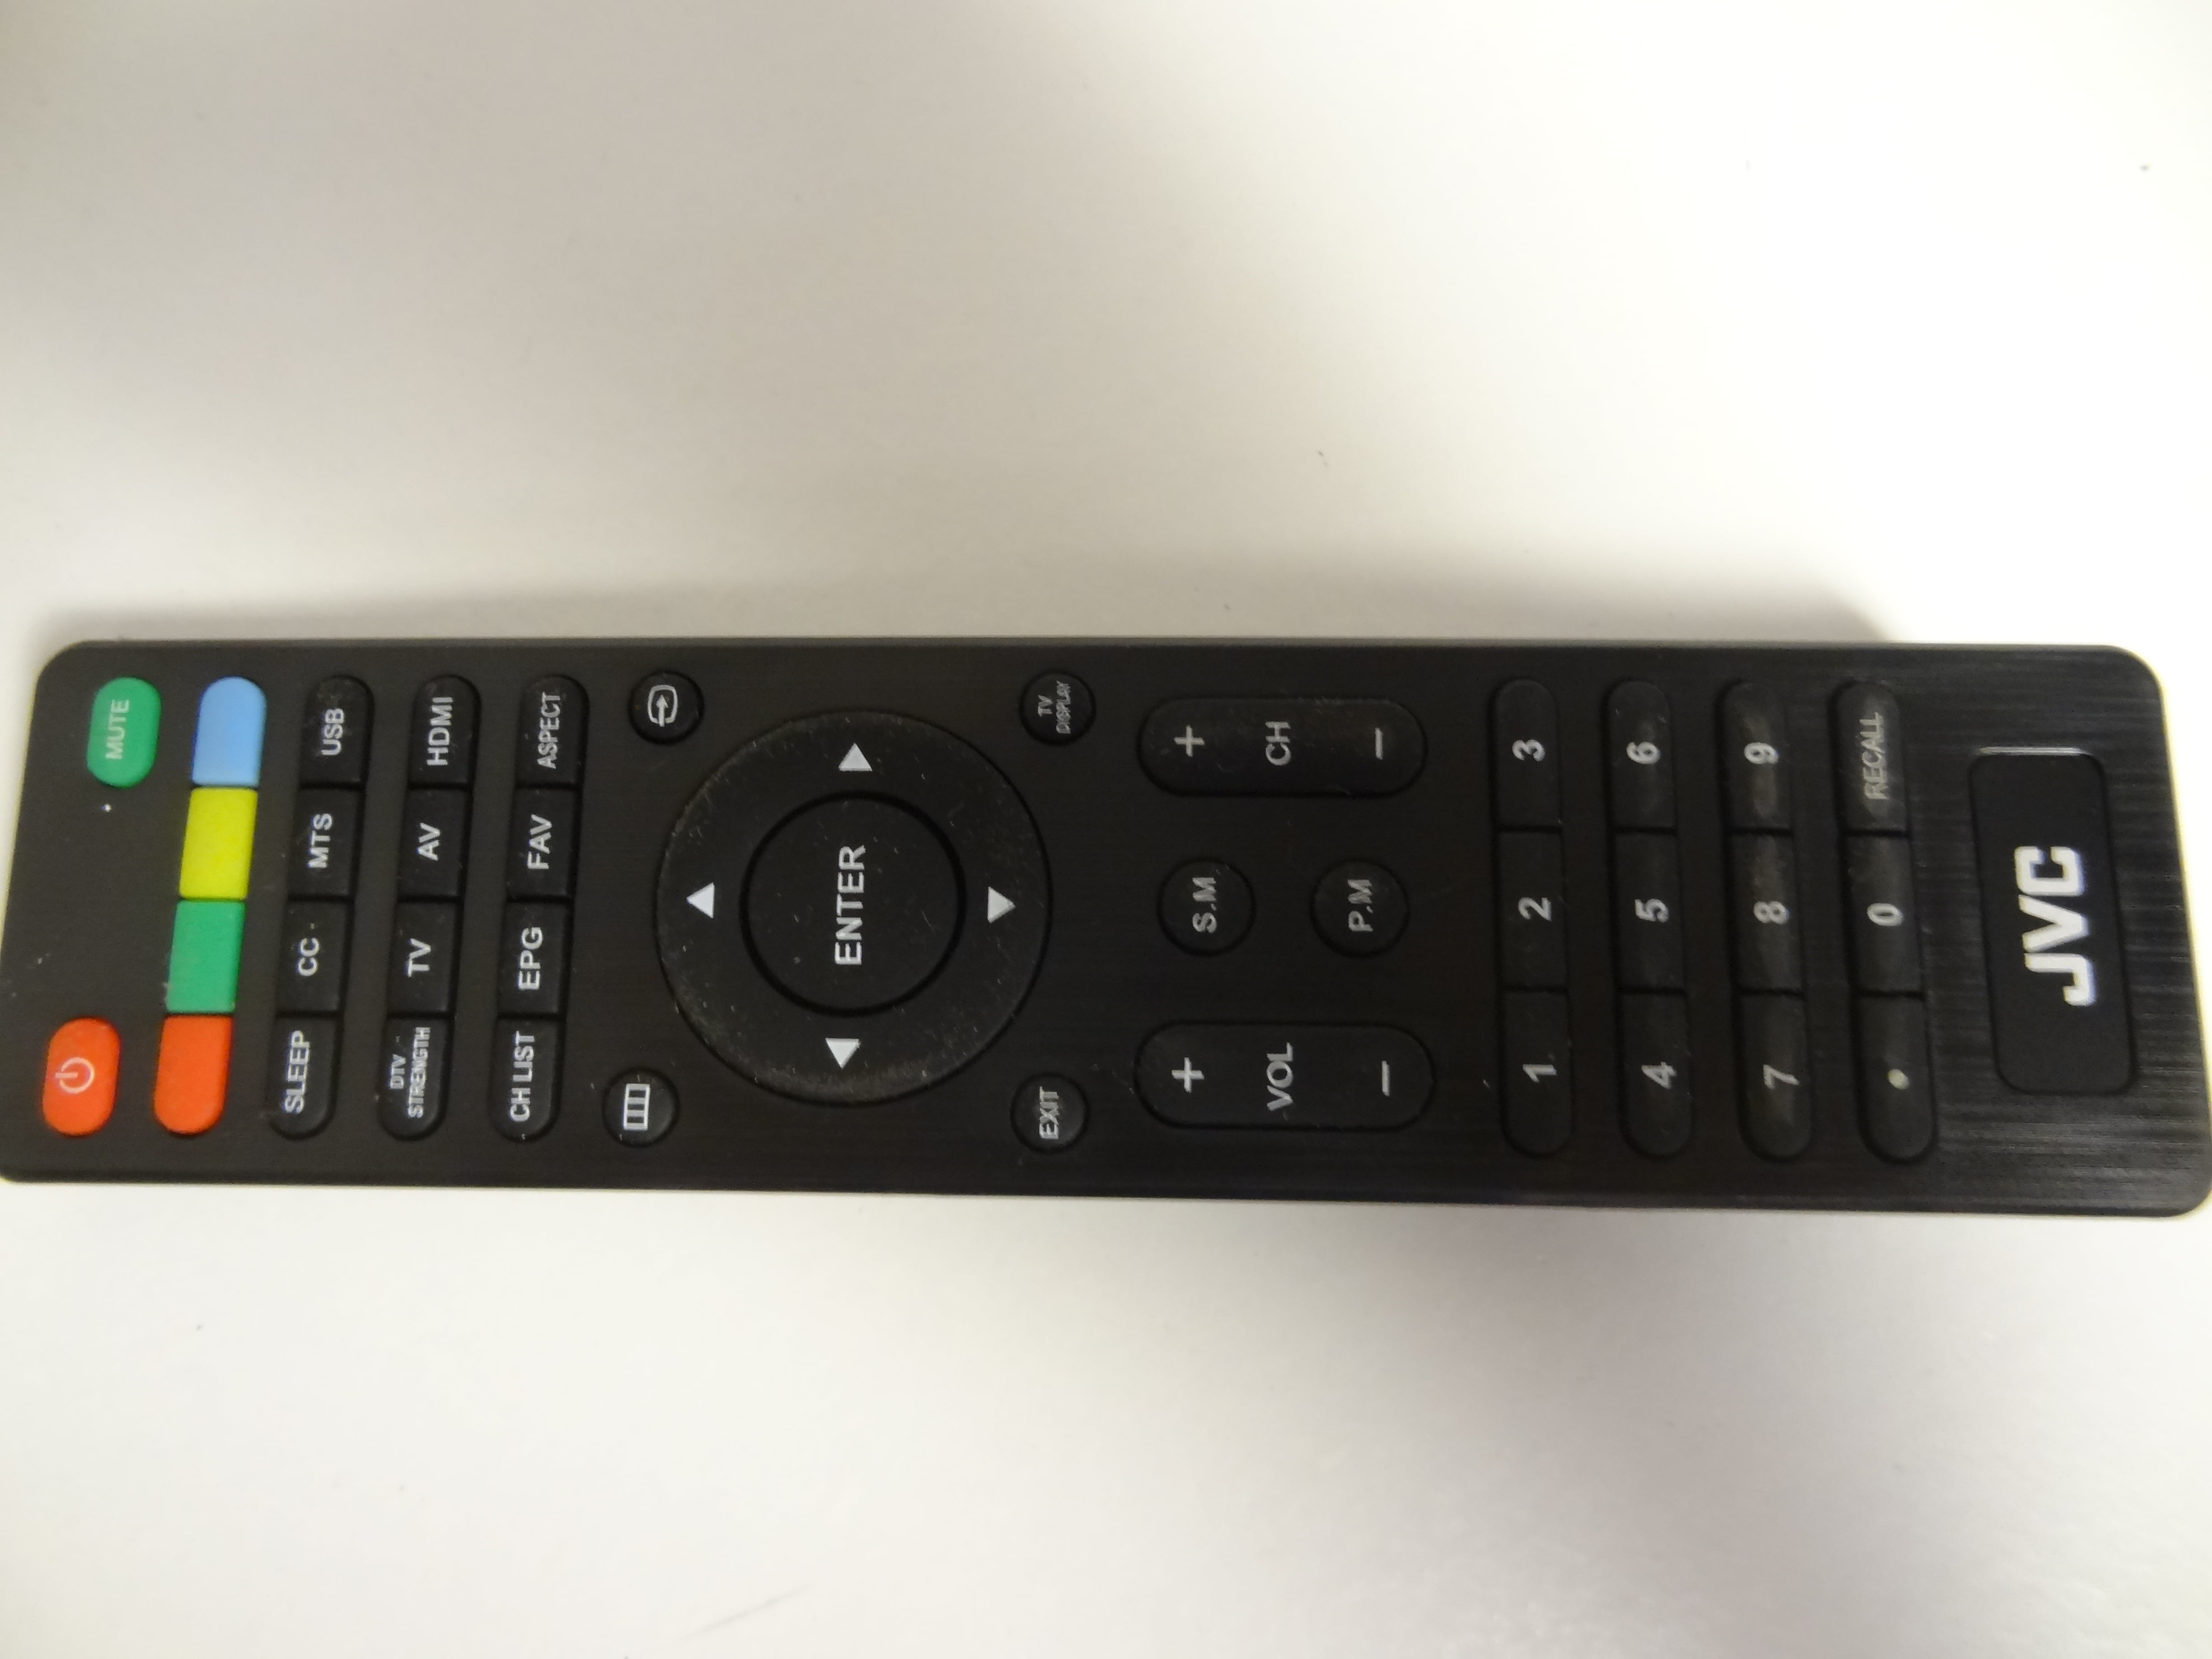 HCDZ Replacement Remote Control for JVC RM-C3320 LT-43MA770 LT-48MA570 LT-50MAW780 LT-50MAW500 LT-55MA770 LT-65MA770 4K Ultra HD LED TV 